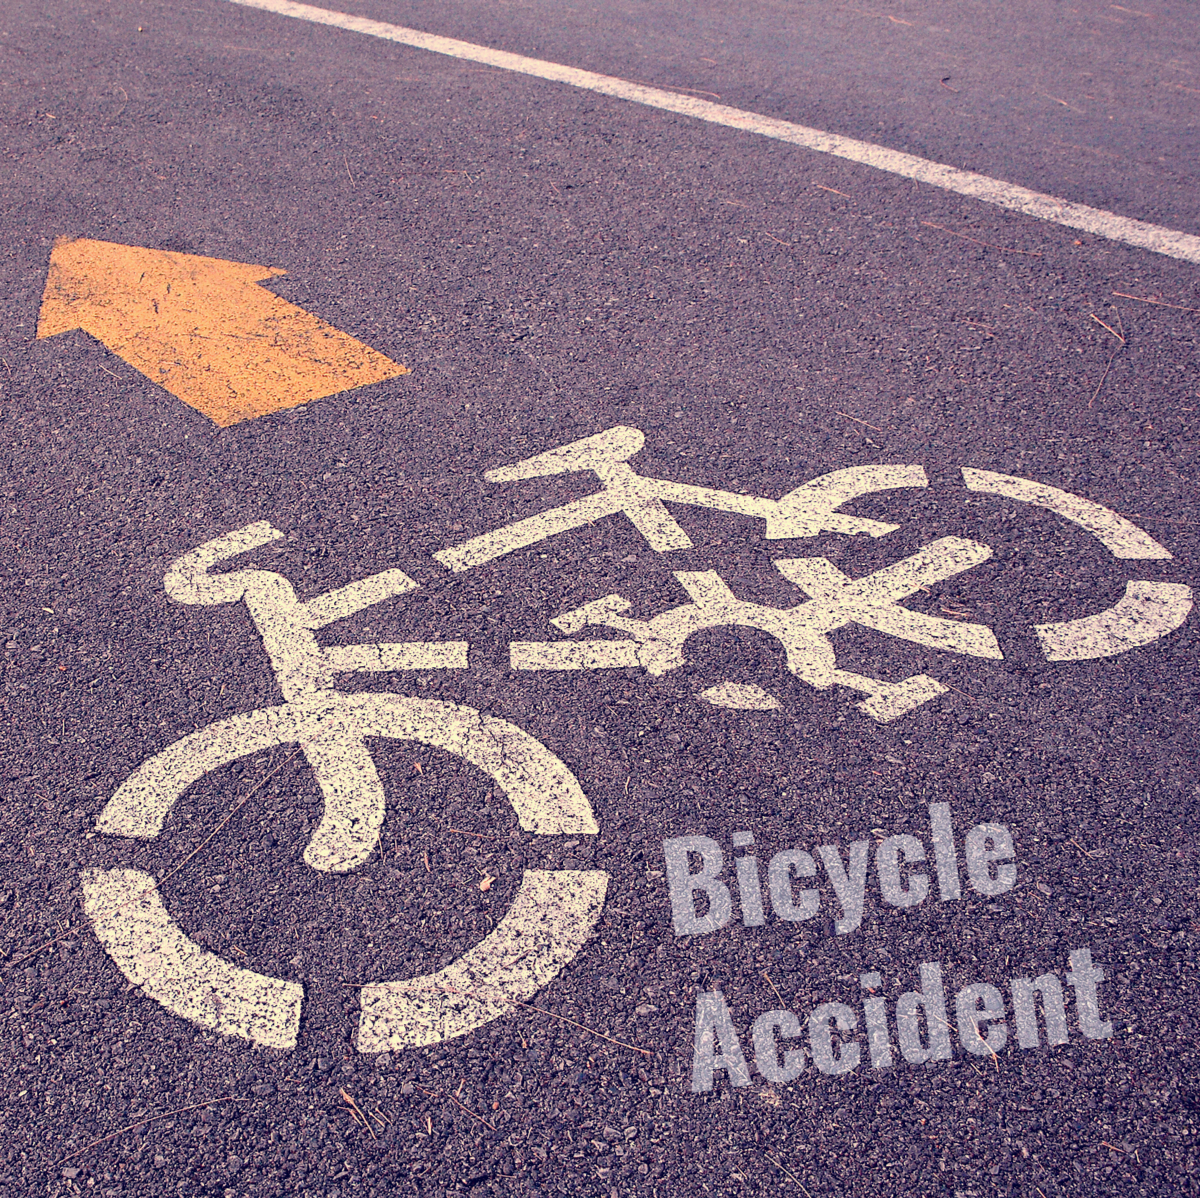 Russell Hofeling Bicycle Accident Martinez Arnold Drive 